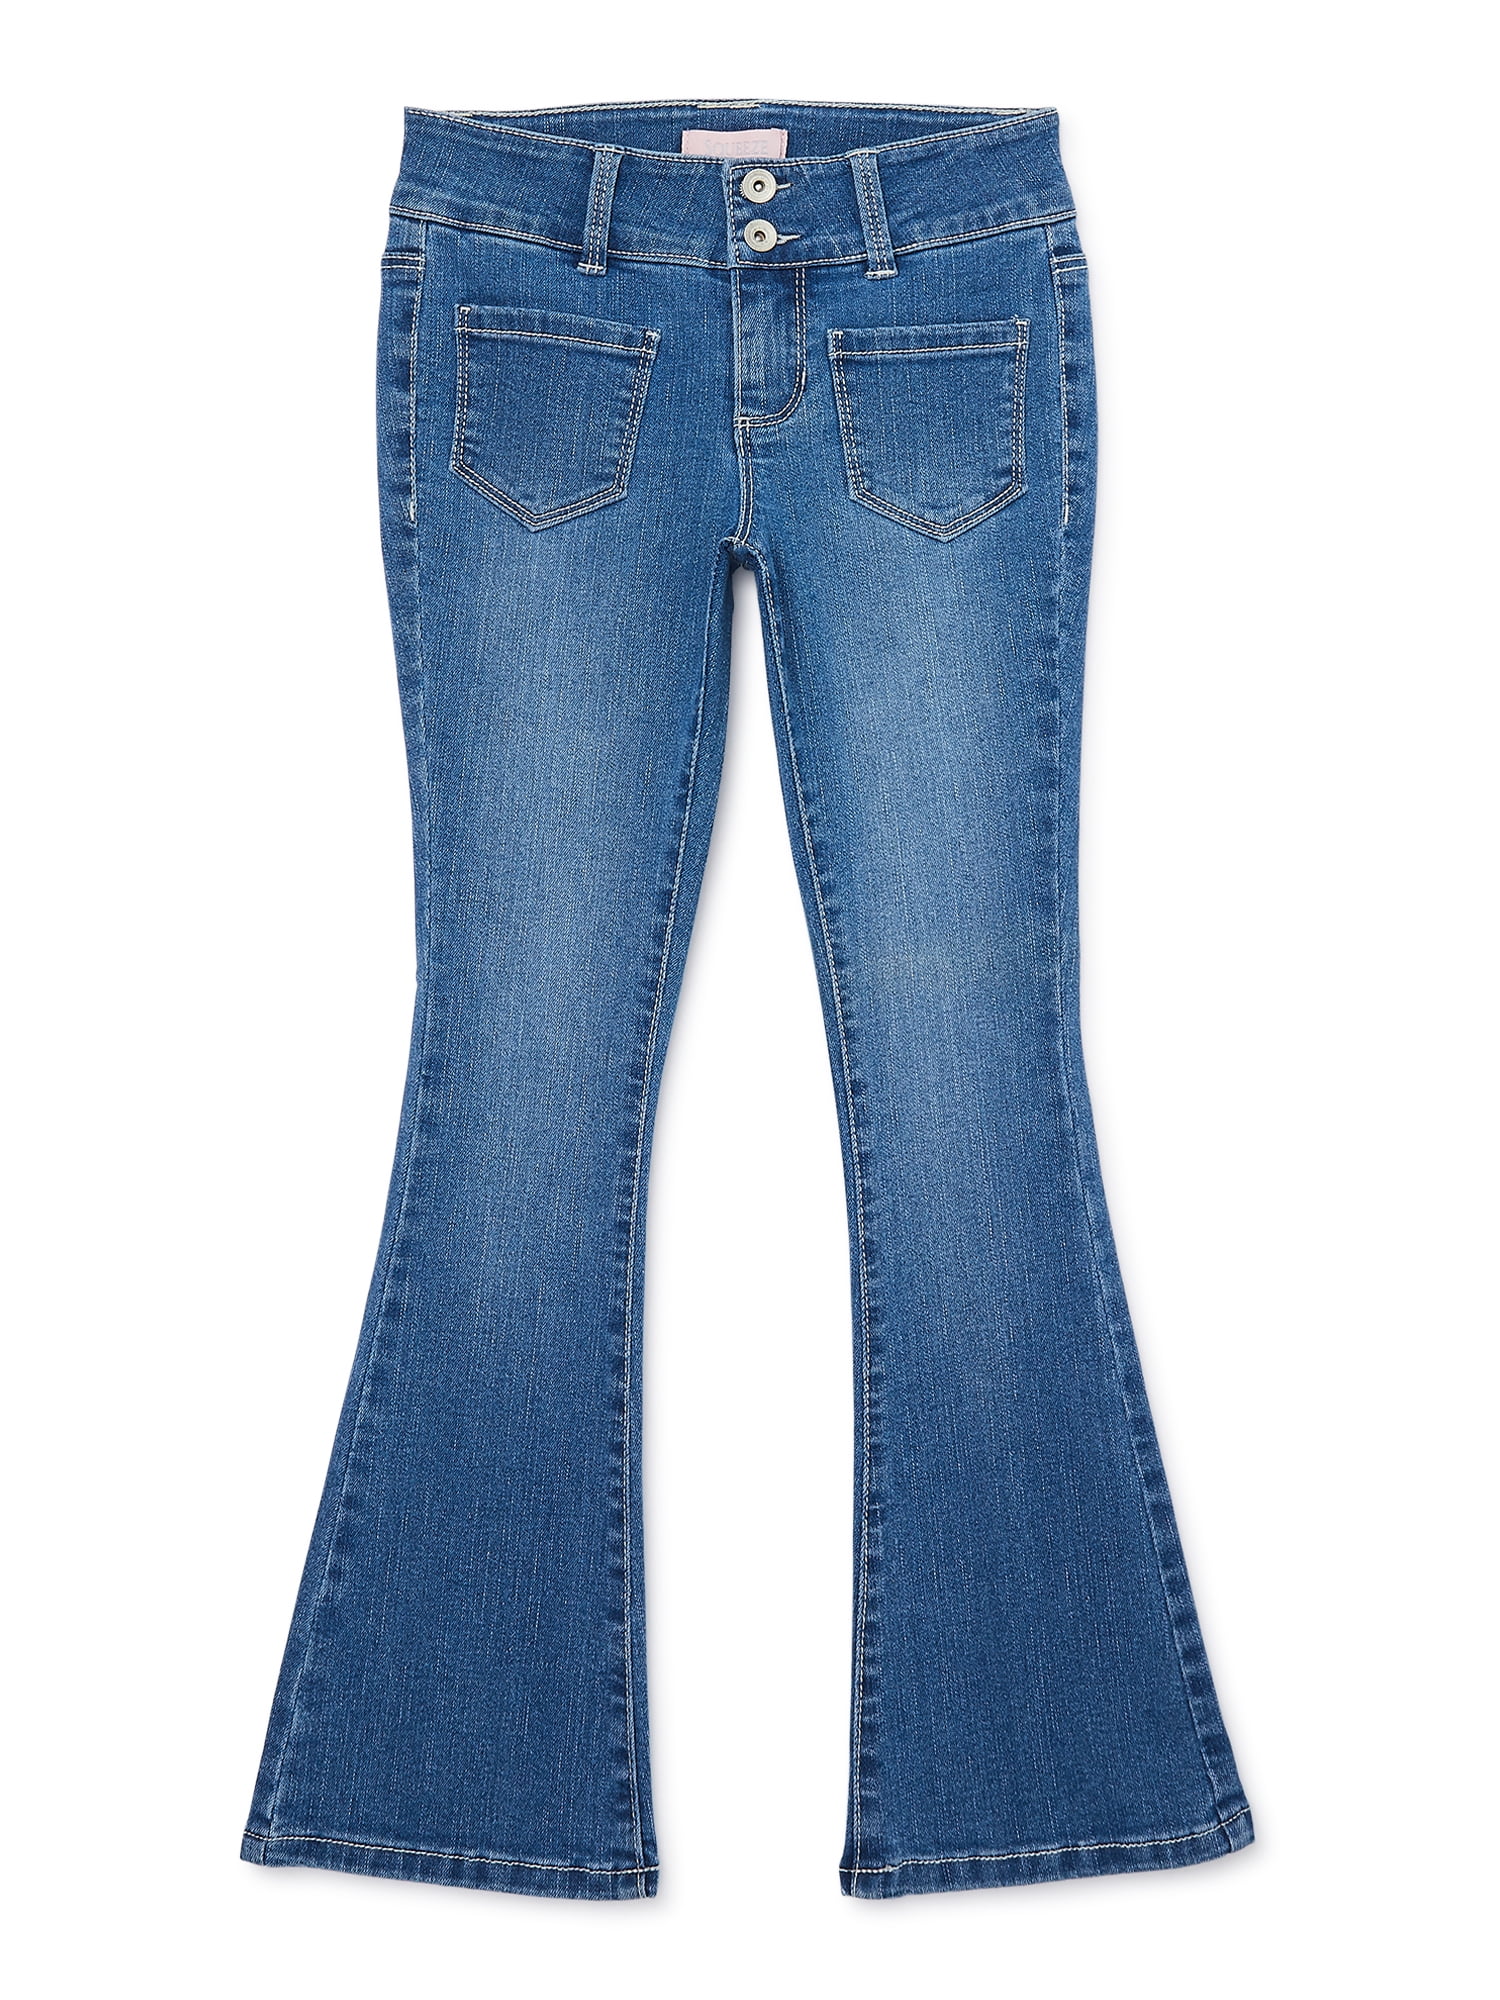 Squeeze Girls' Patch Pocket Flare Jeans, Sizes 7-12 - Walmart.com